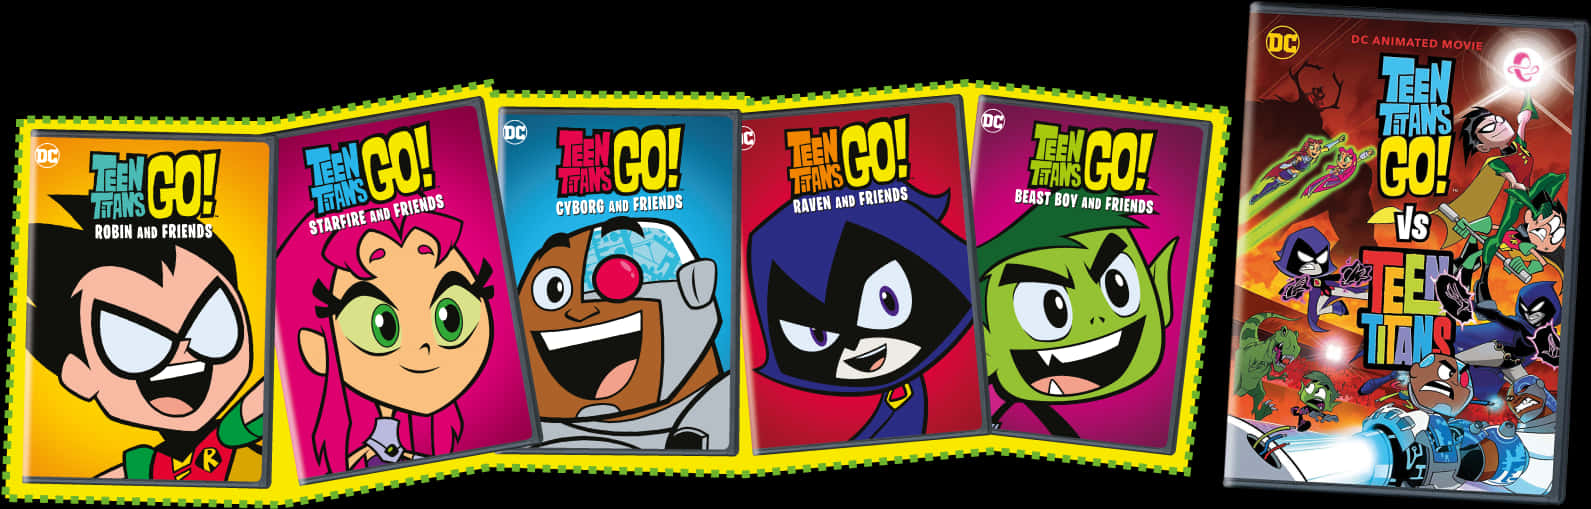 Teen Titans Go Character Covers